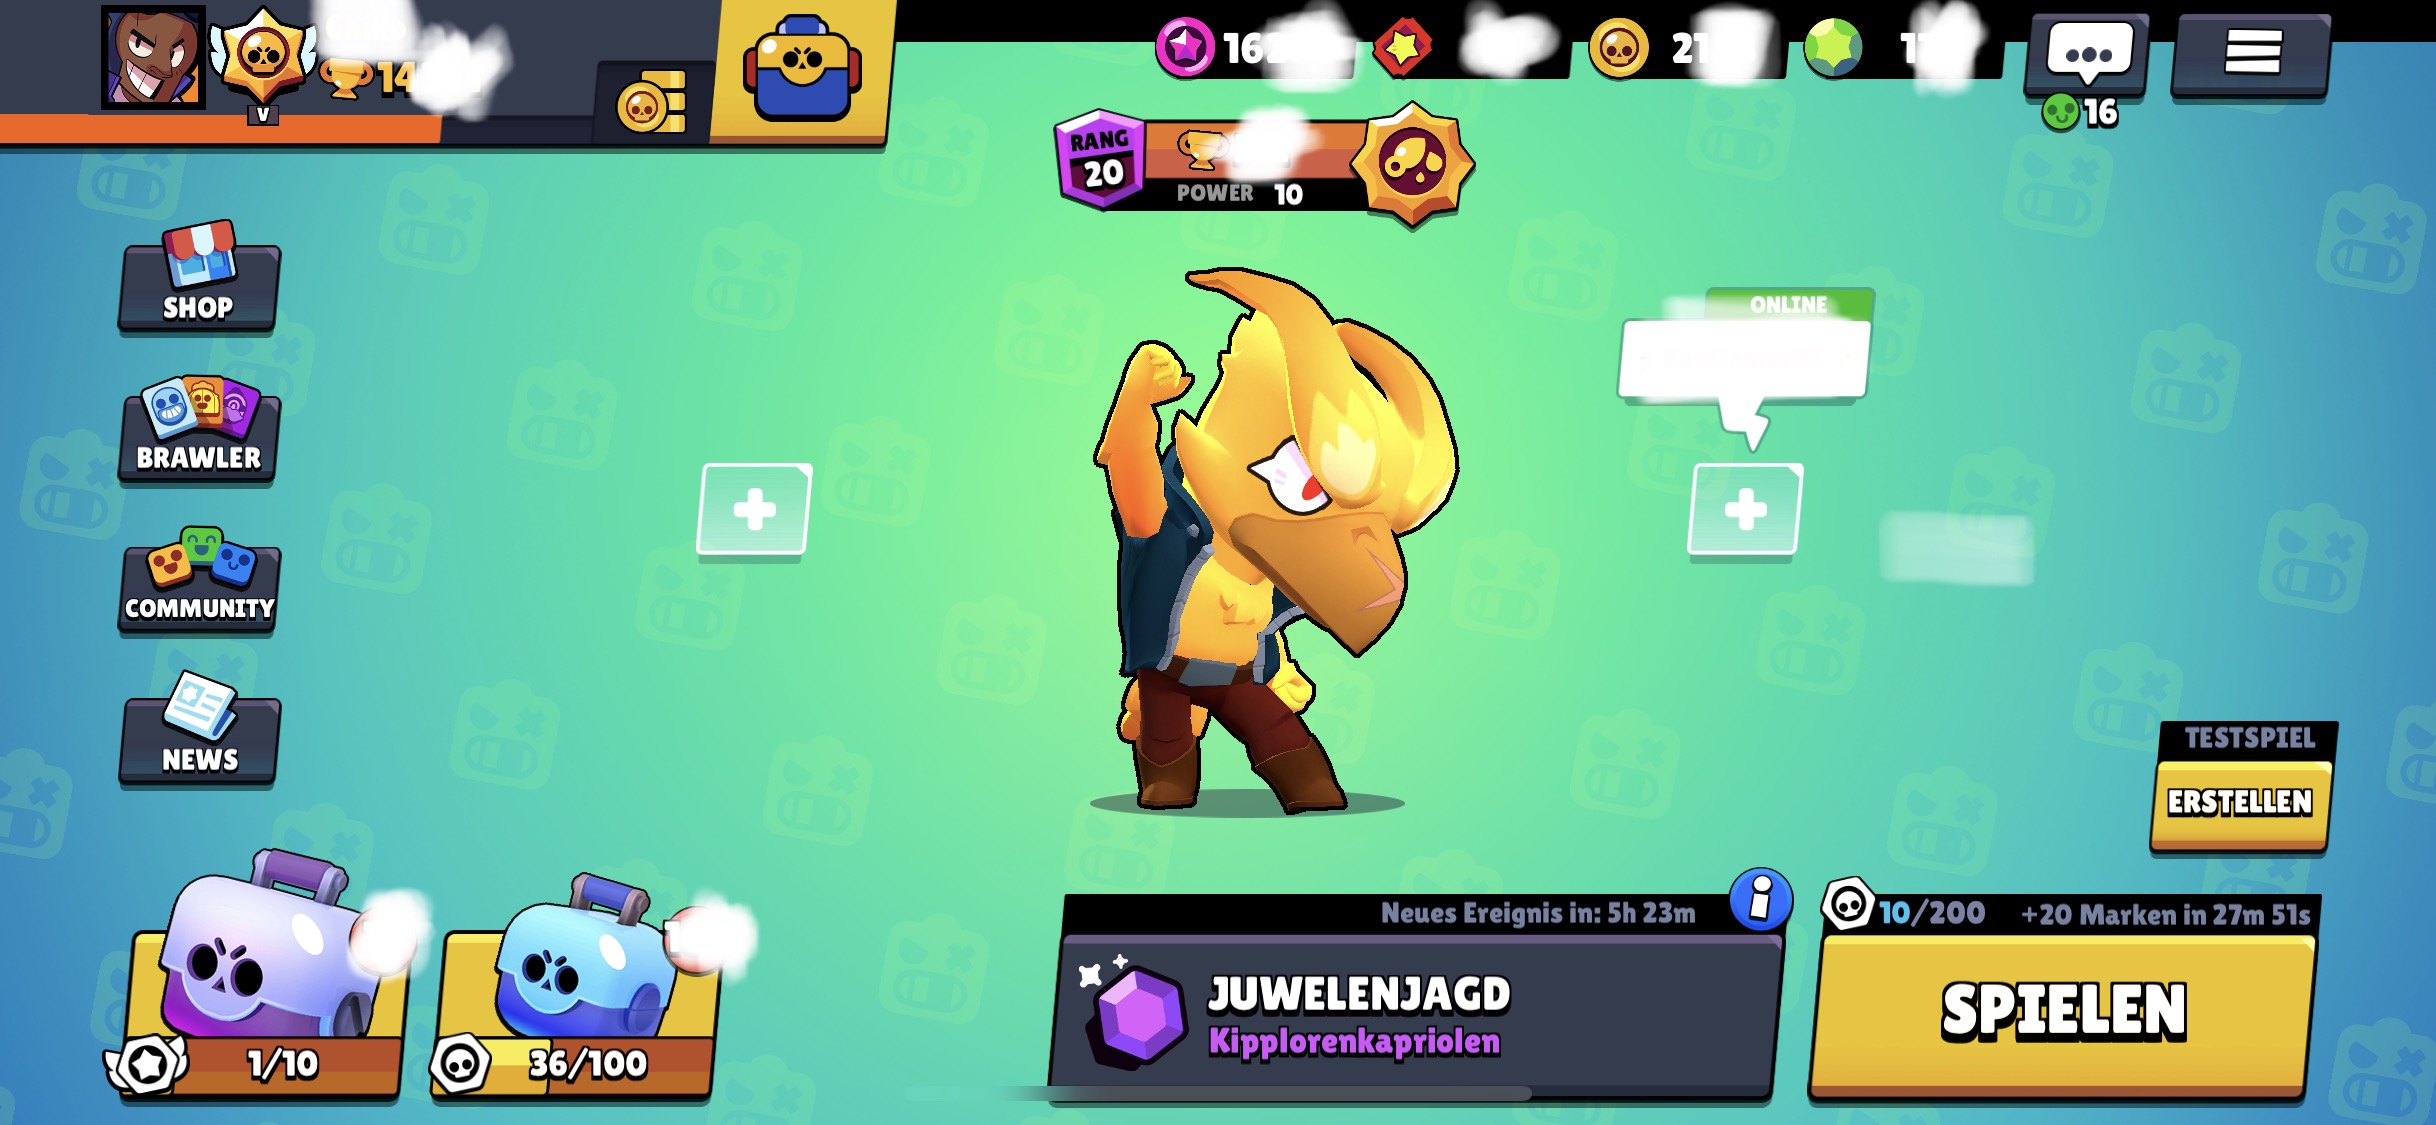 Brawl Stars Max Account With 14800 Trophies And Over 16000 Starpoints Epicnpc Marketplace - brawl star epic star marken